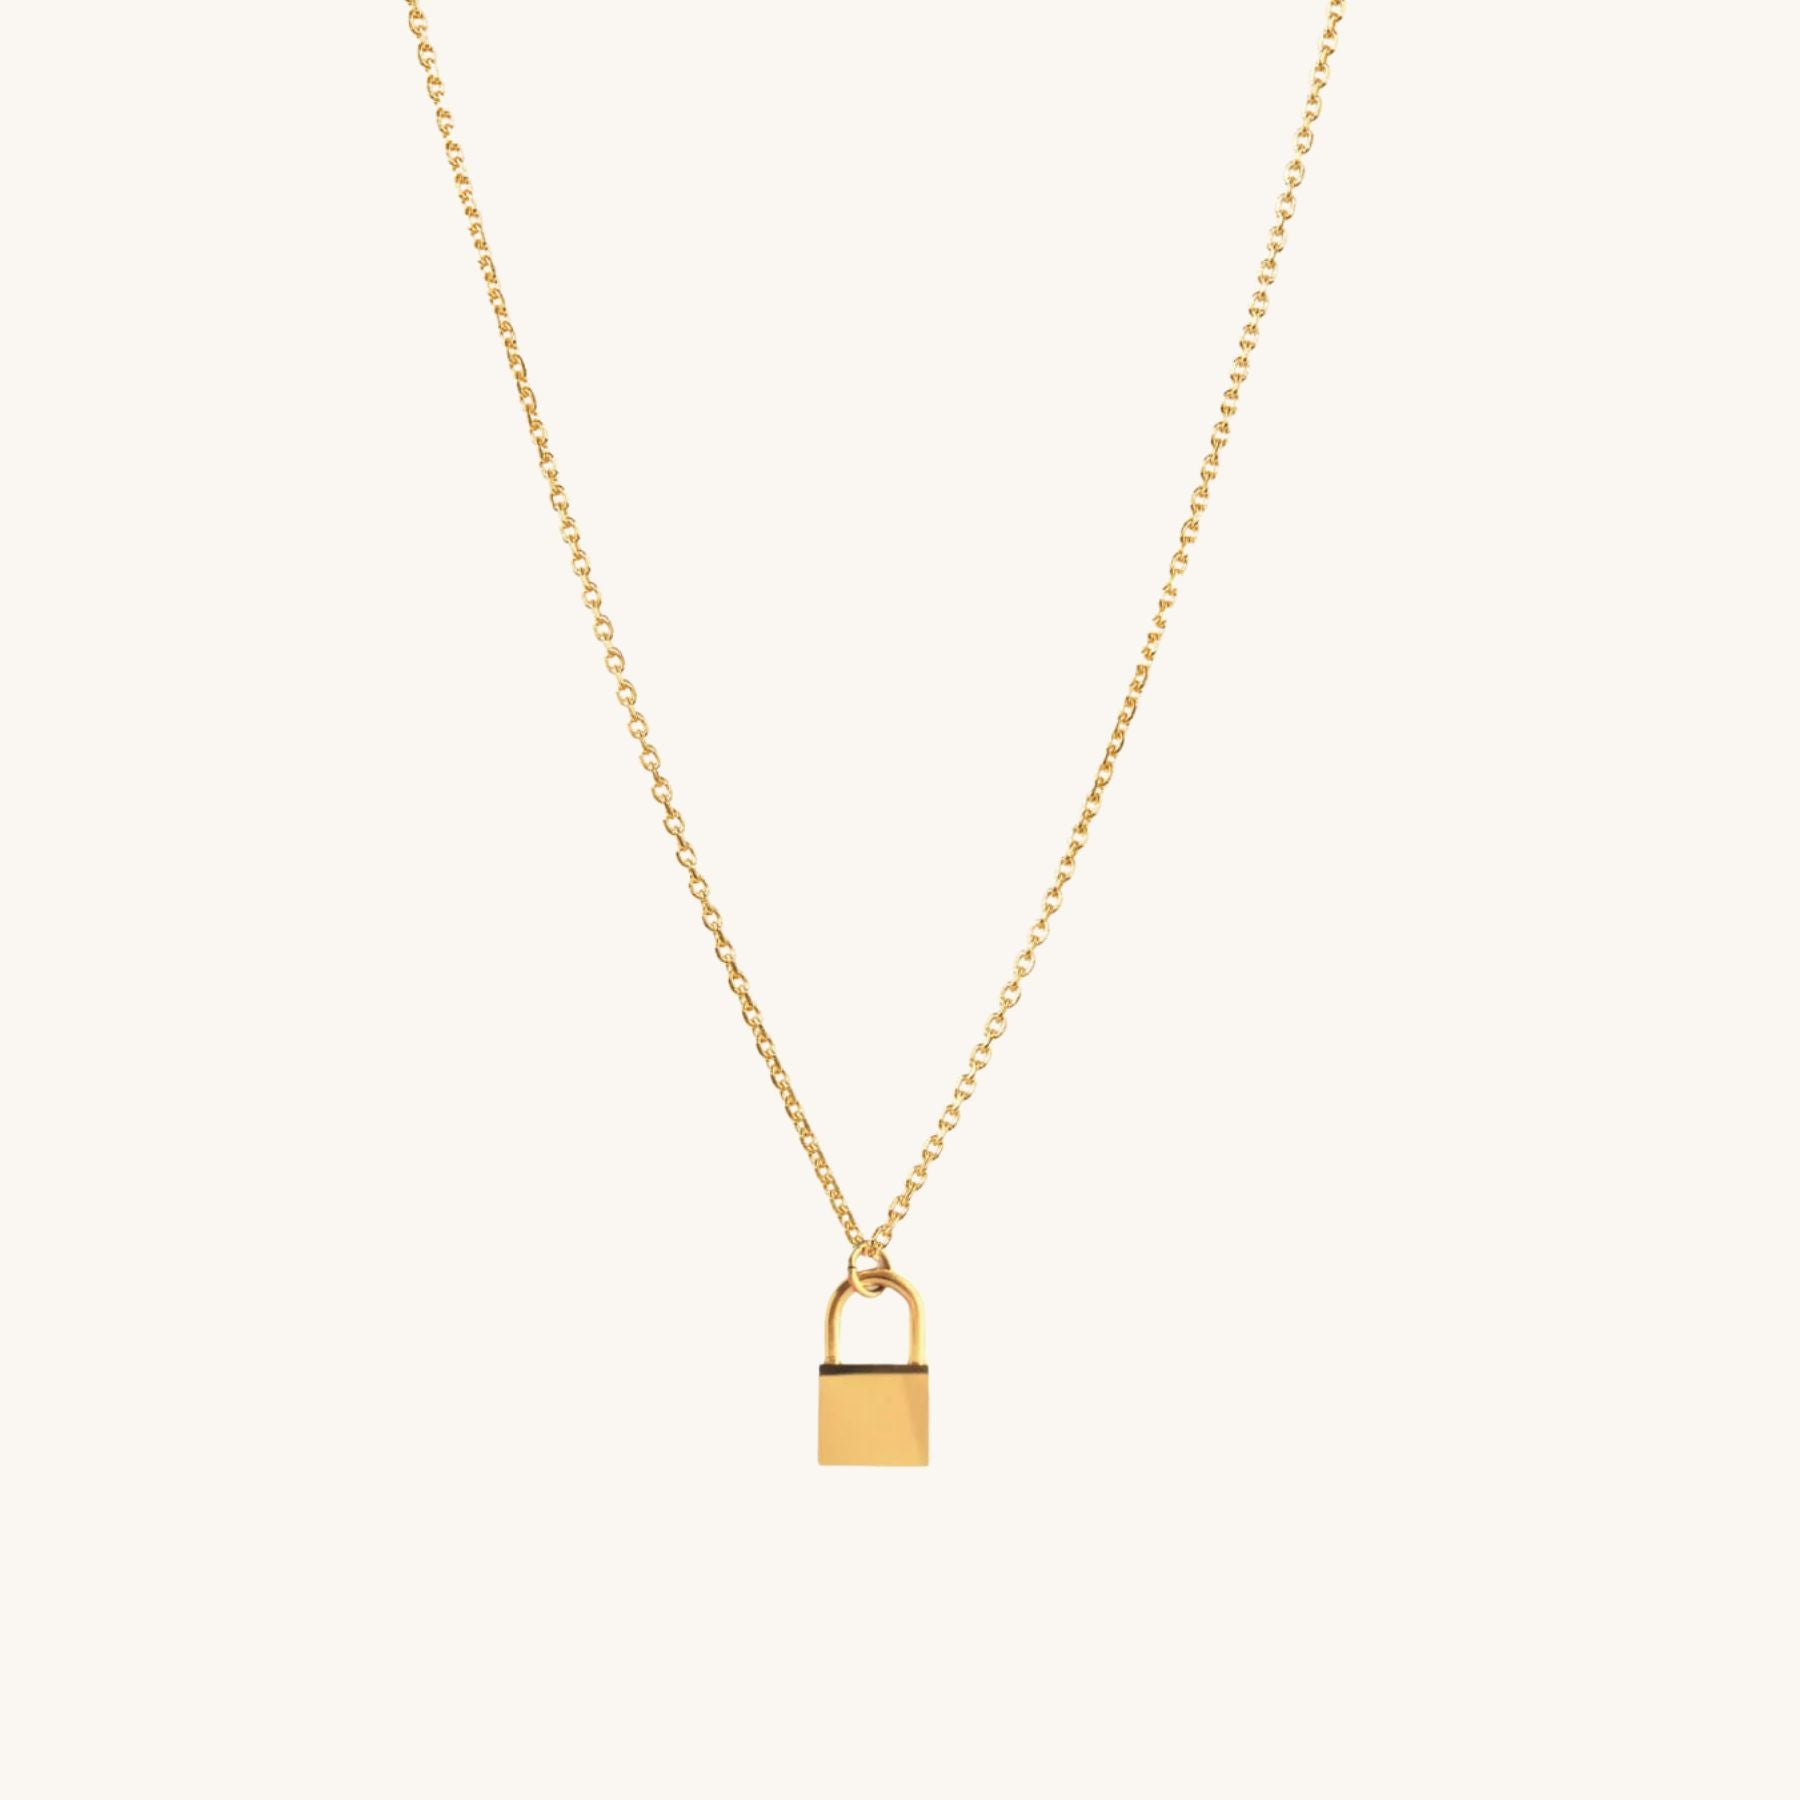 Small Lock Necklace